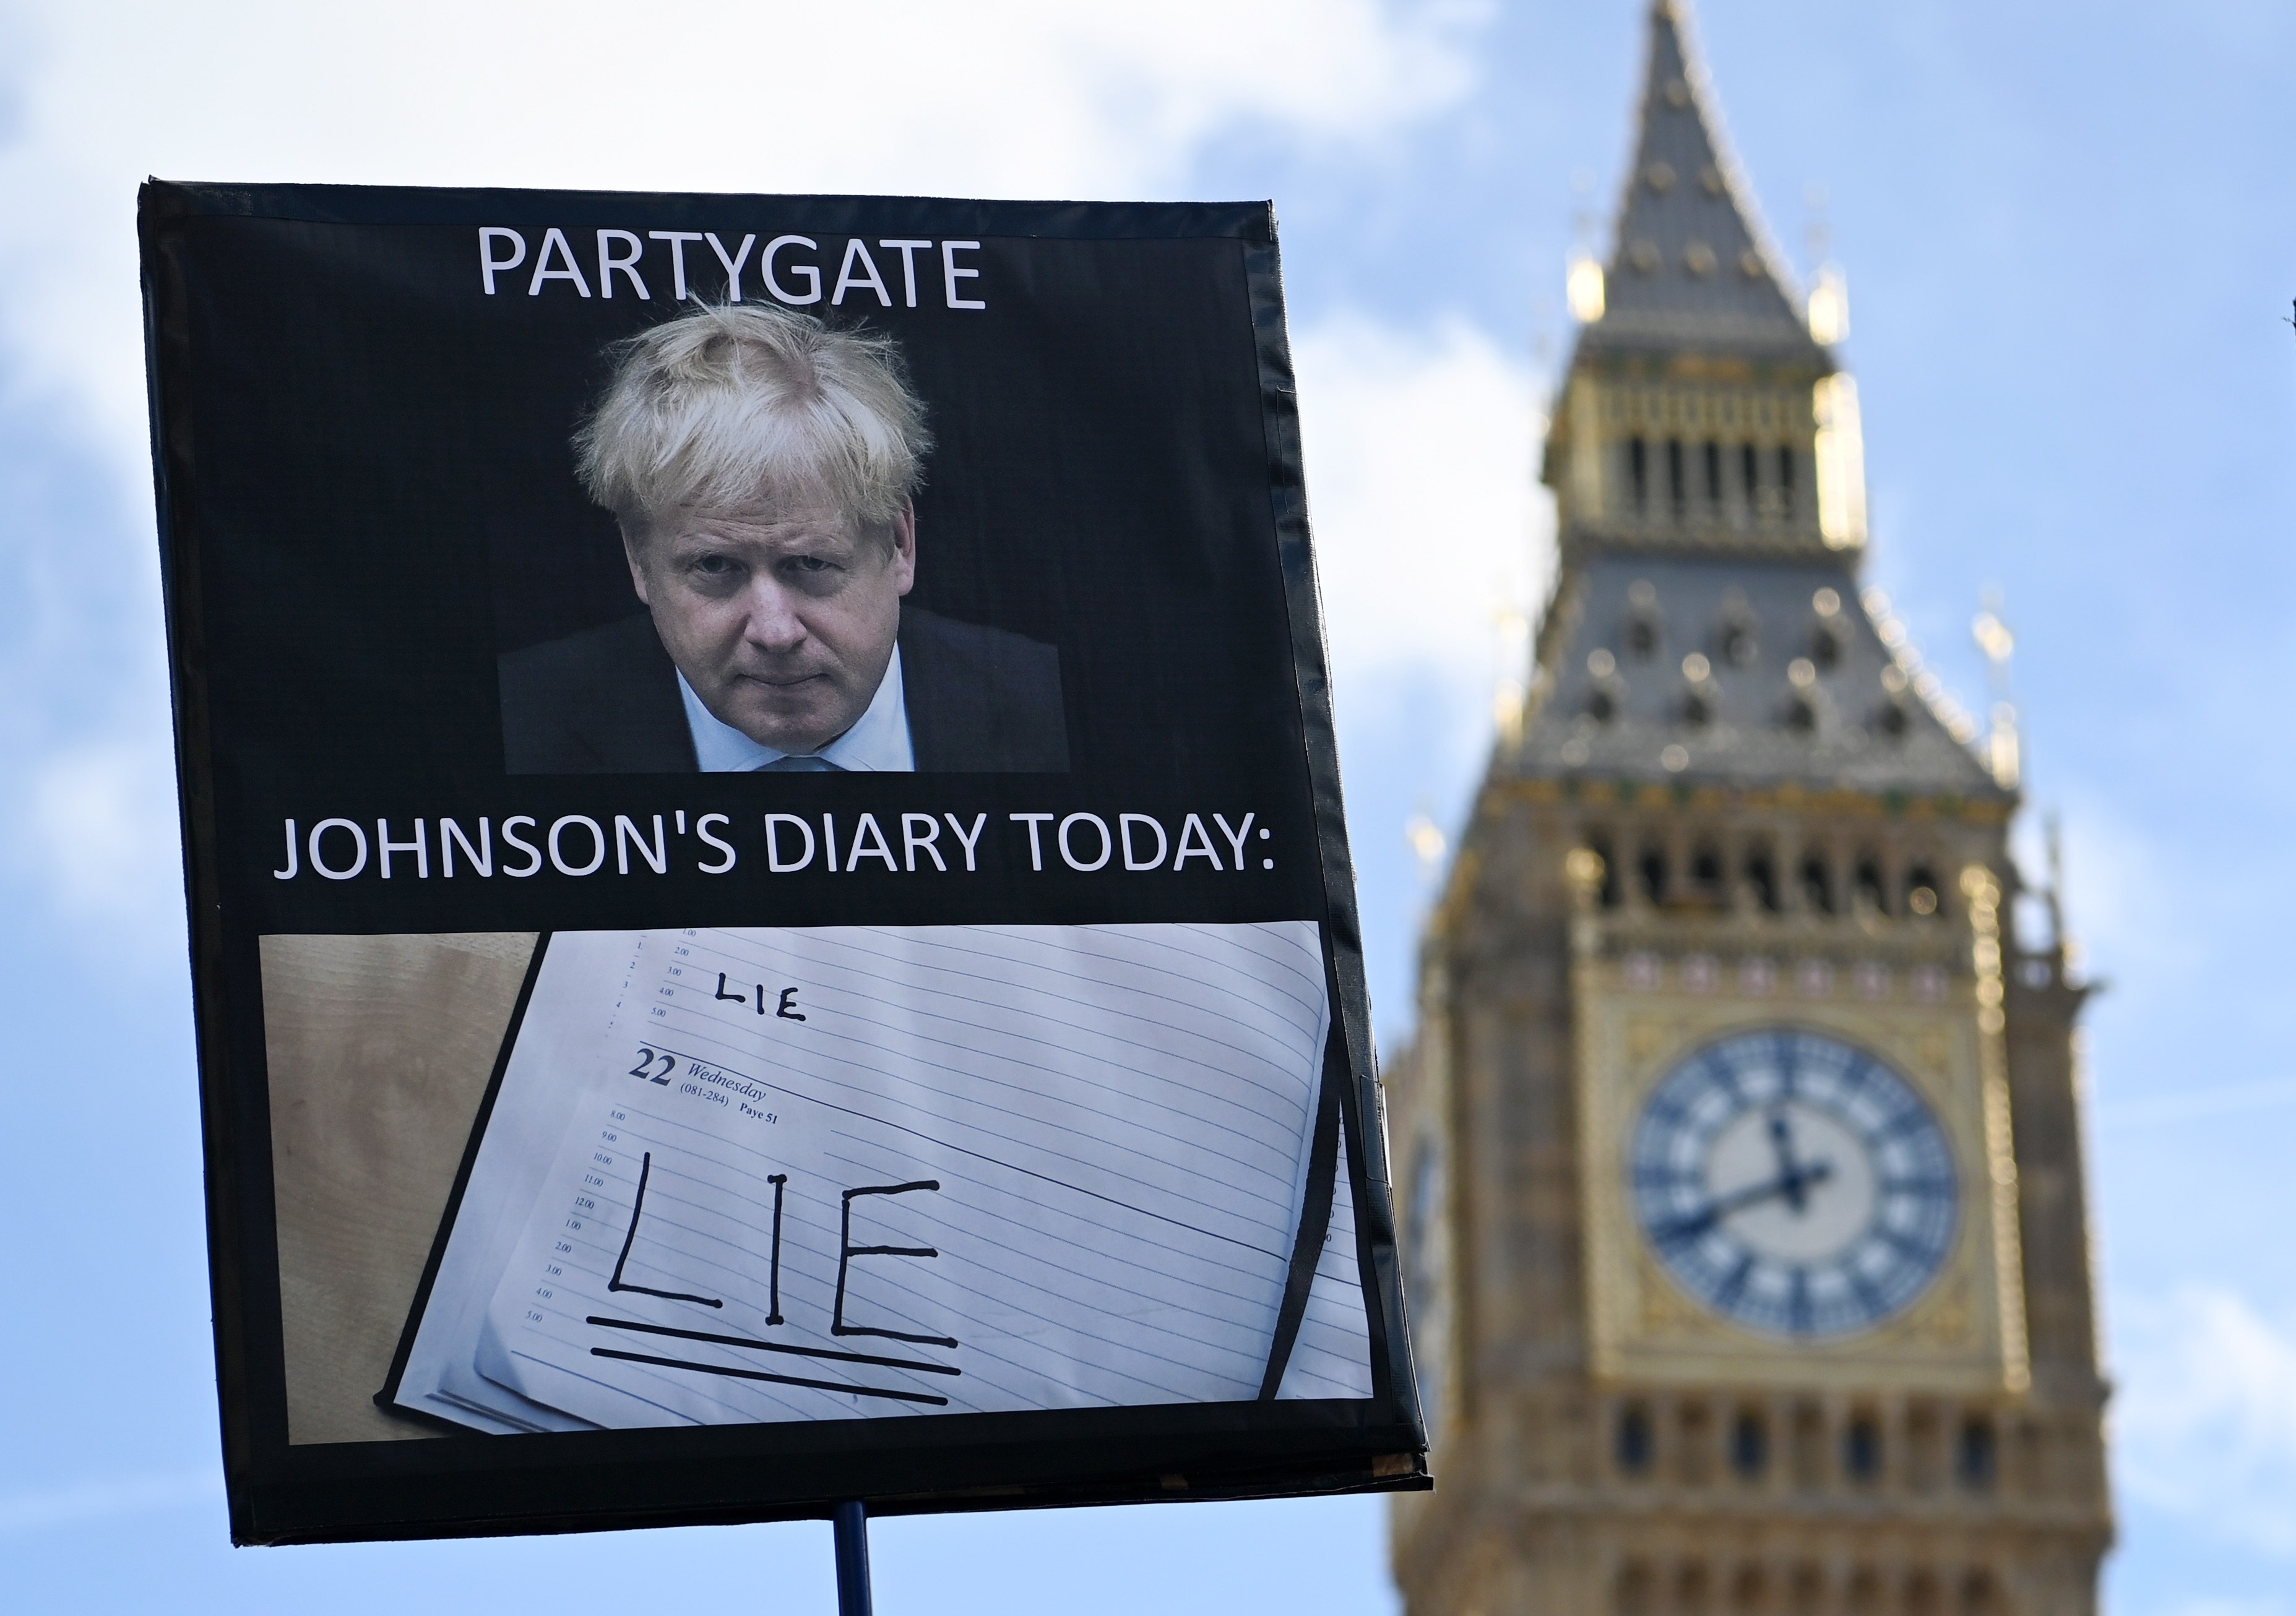 A protester’s sign is seen outside parliament in London on Wednesday as former British PM Boris Johnson gives evidence to MPs investigating Covid-19 Partygate accusations. Photo: EPA-EFE